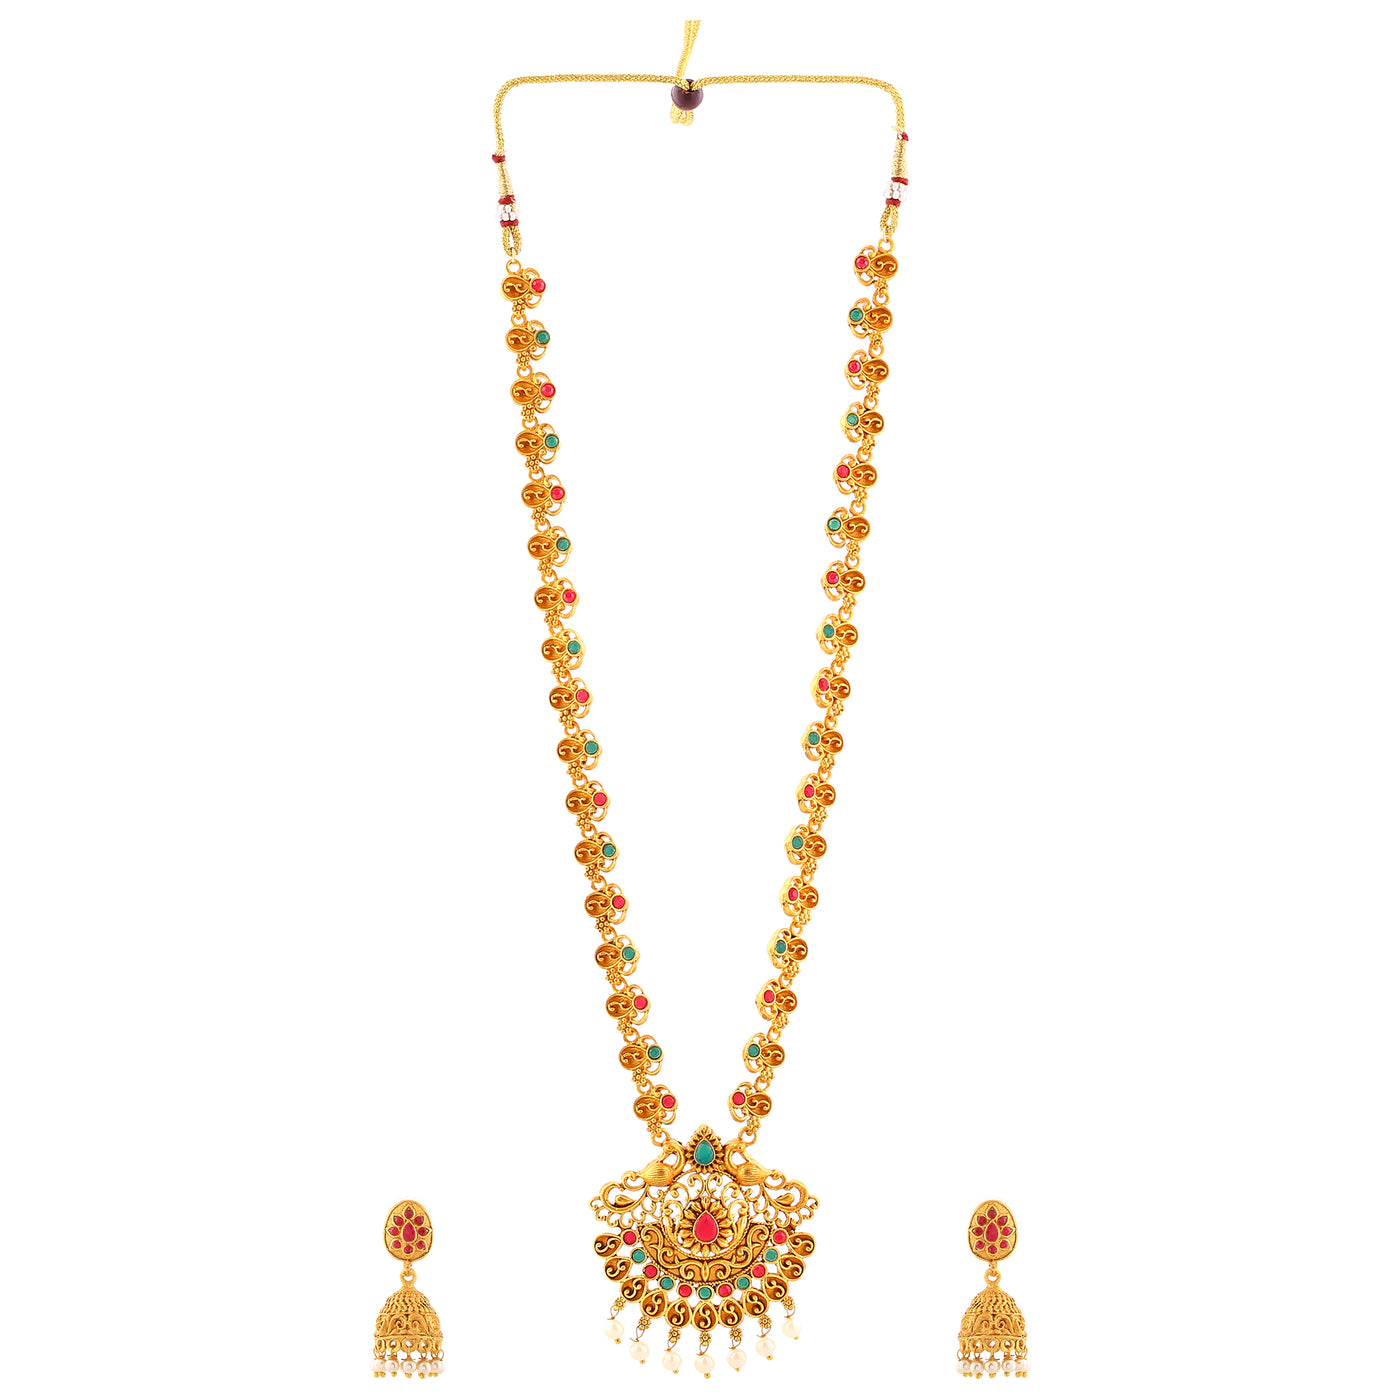 Estele Gold Plated Stunning Peacock Designer Necklace Set with Crystals for Women